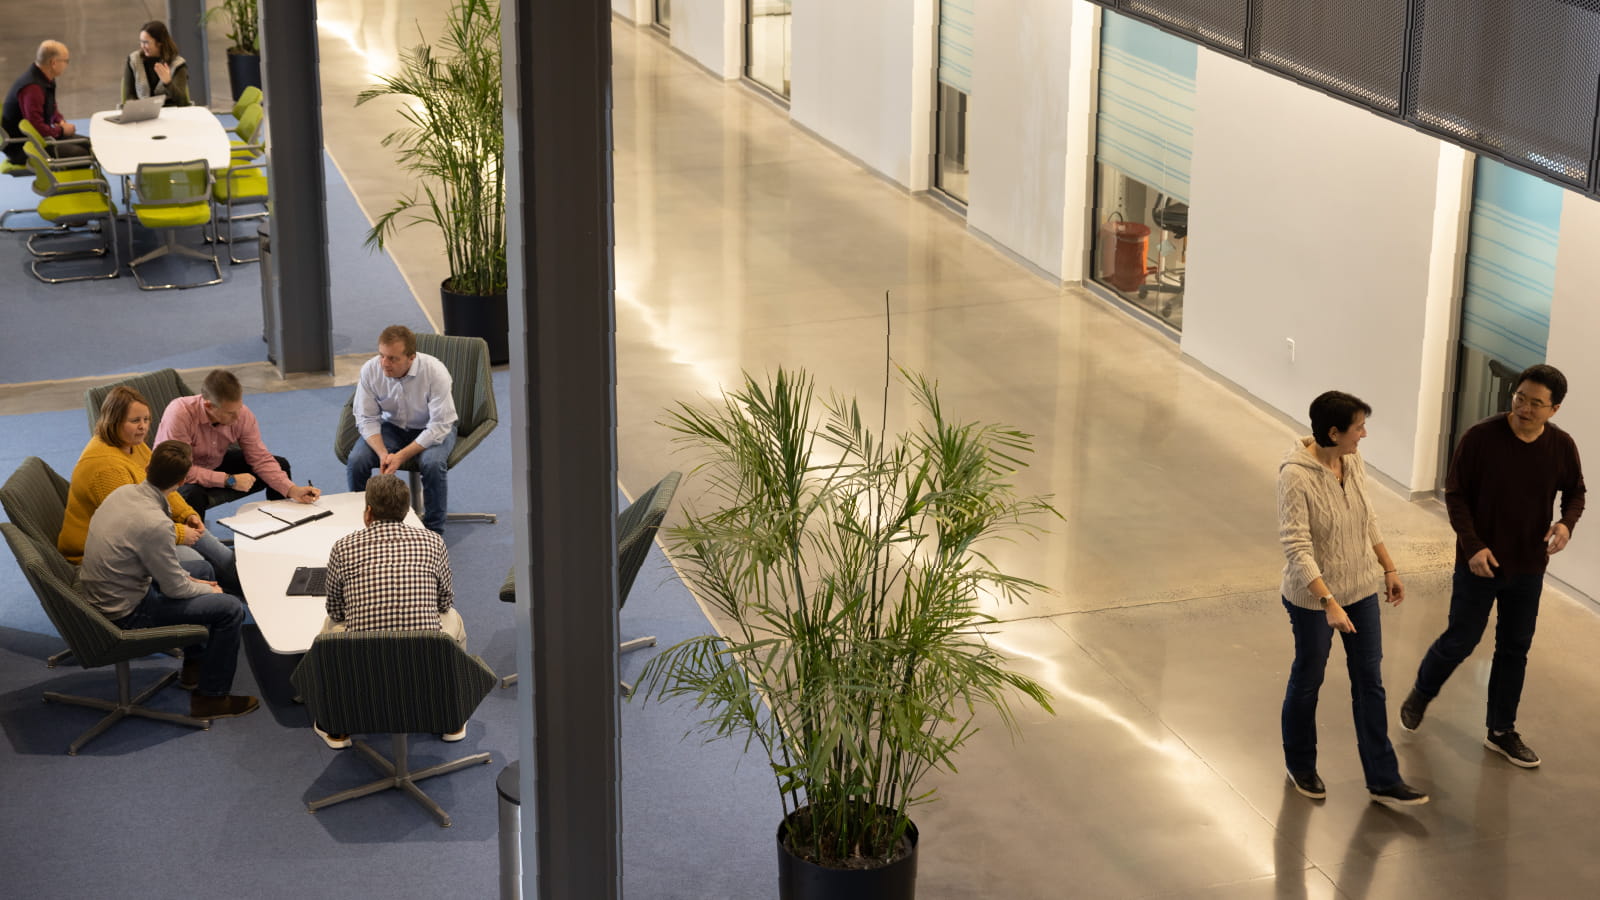 Aerial view of office lobby with employees sitting at tables and walking